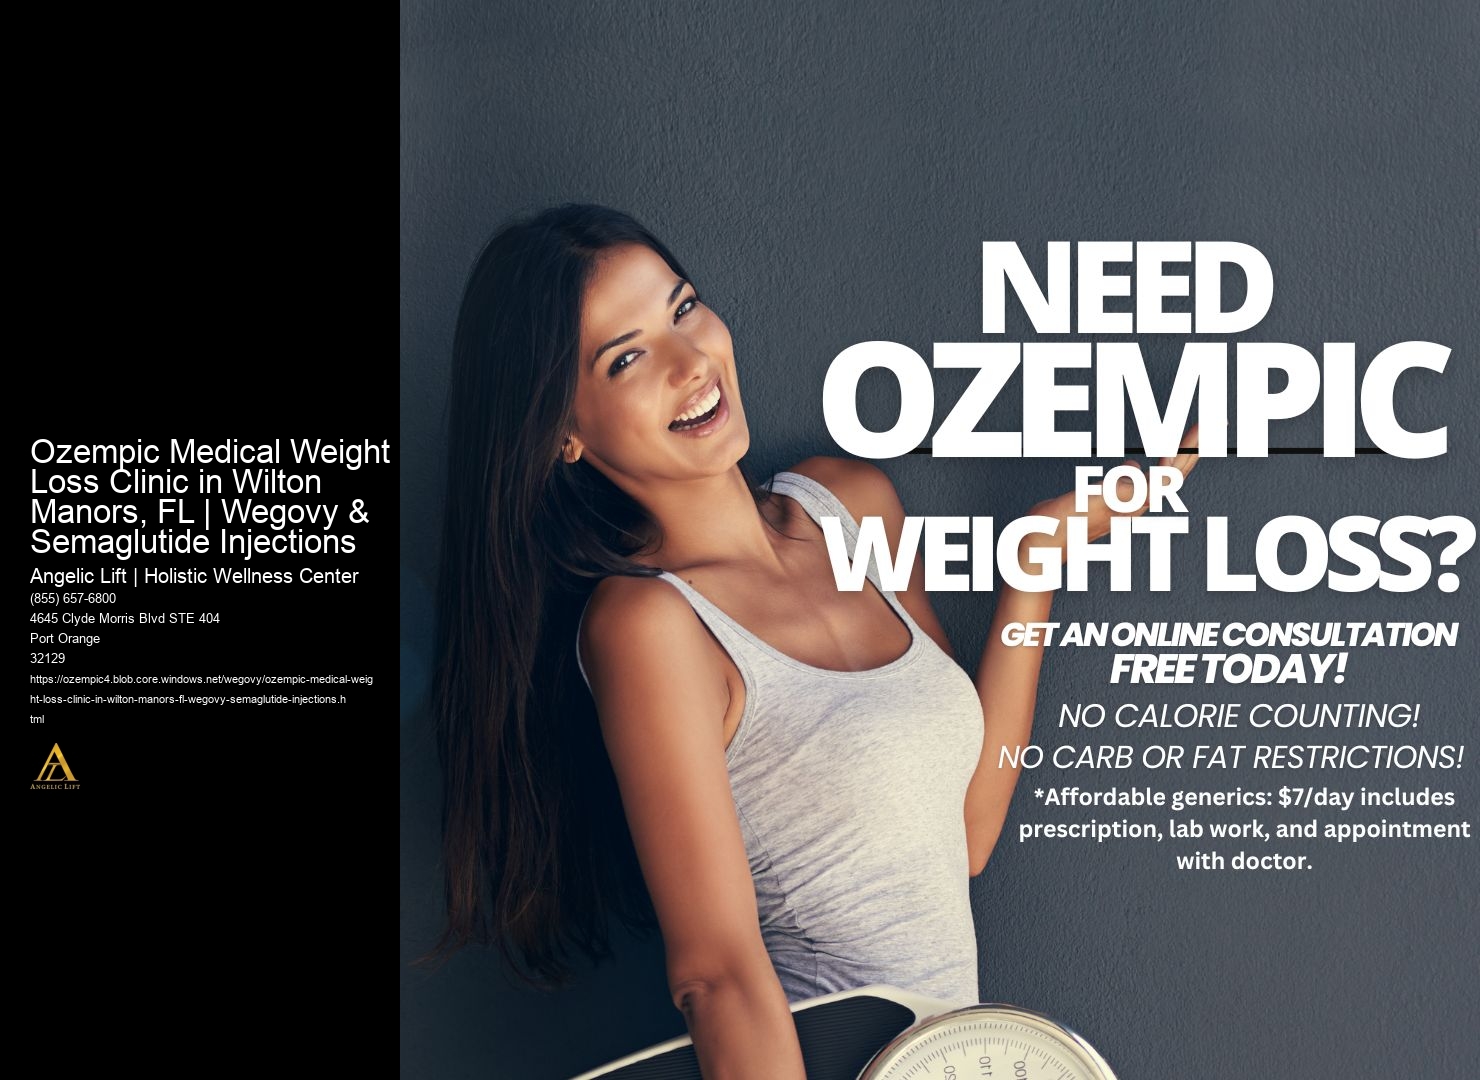 Ozempic Medical Weight Loss Clinic in Wilton Manors, FL | Wegovy & Semaglutide Injections